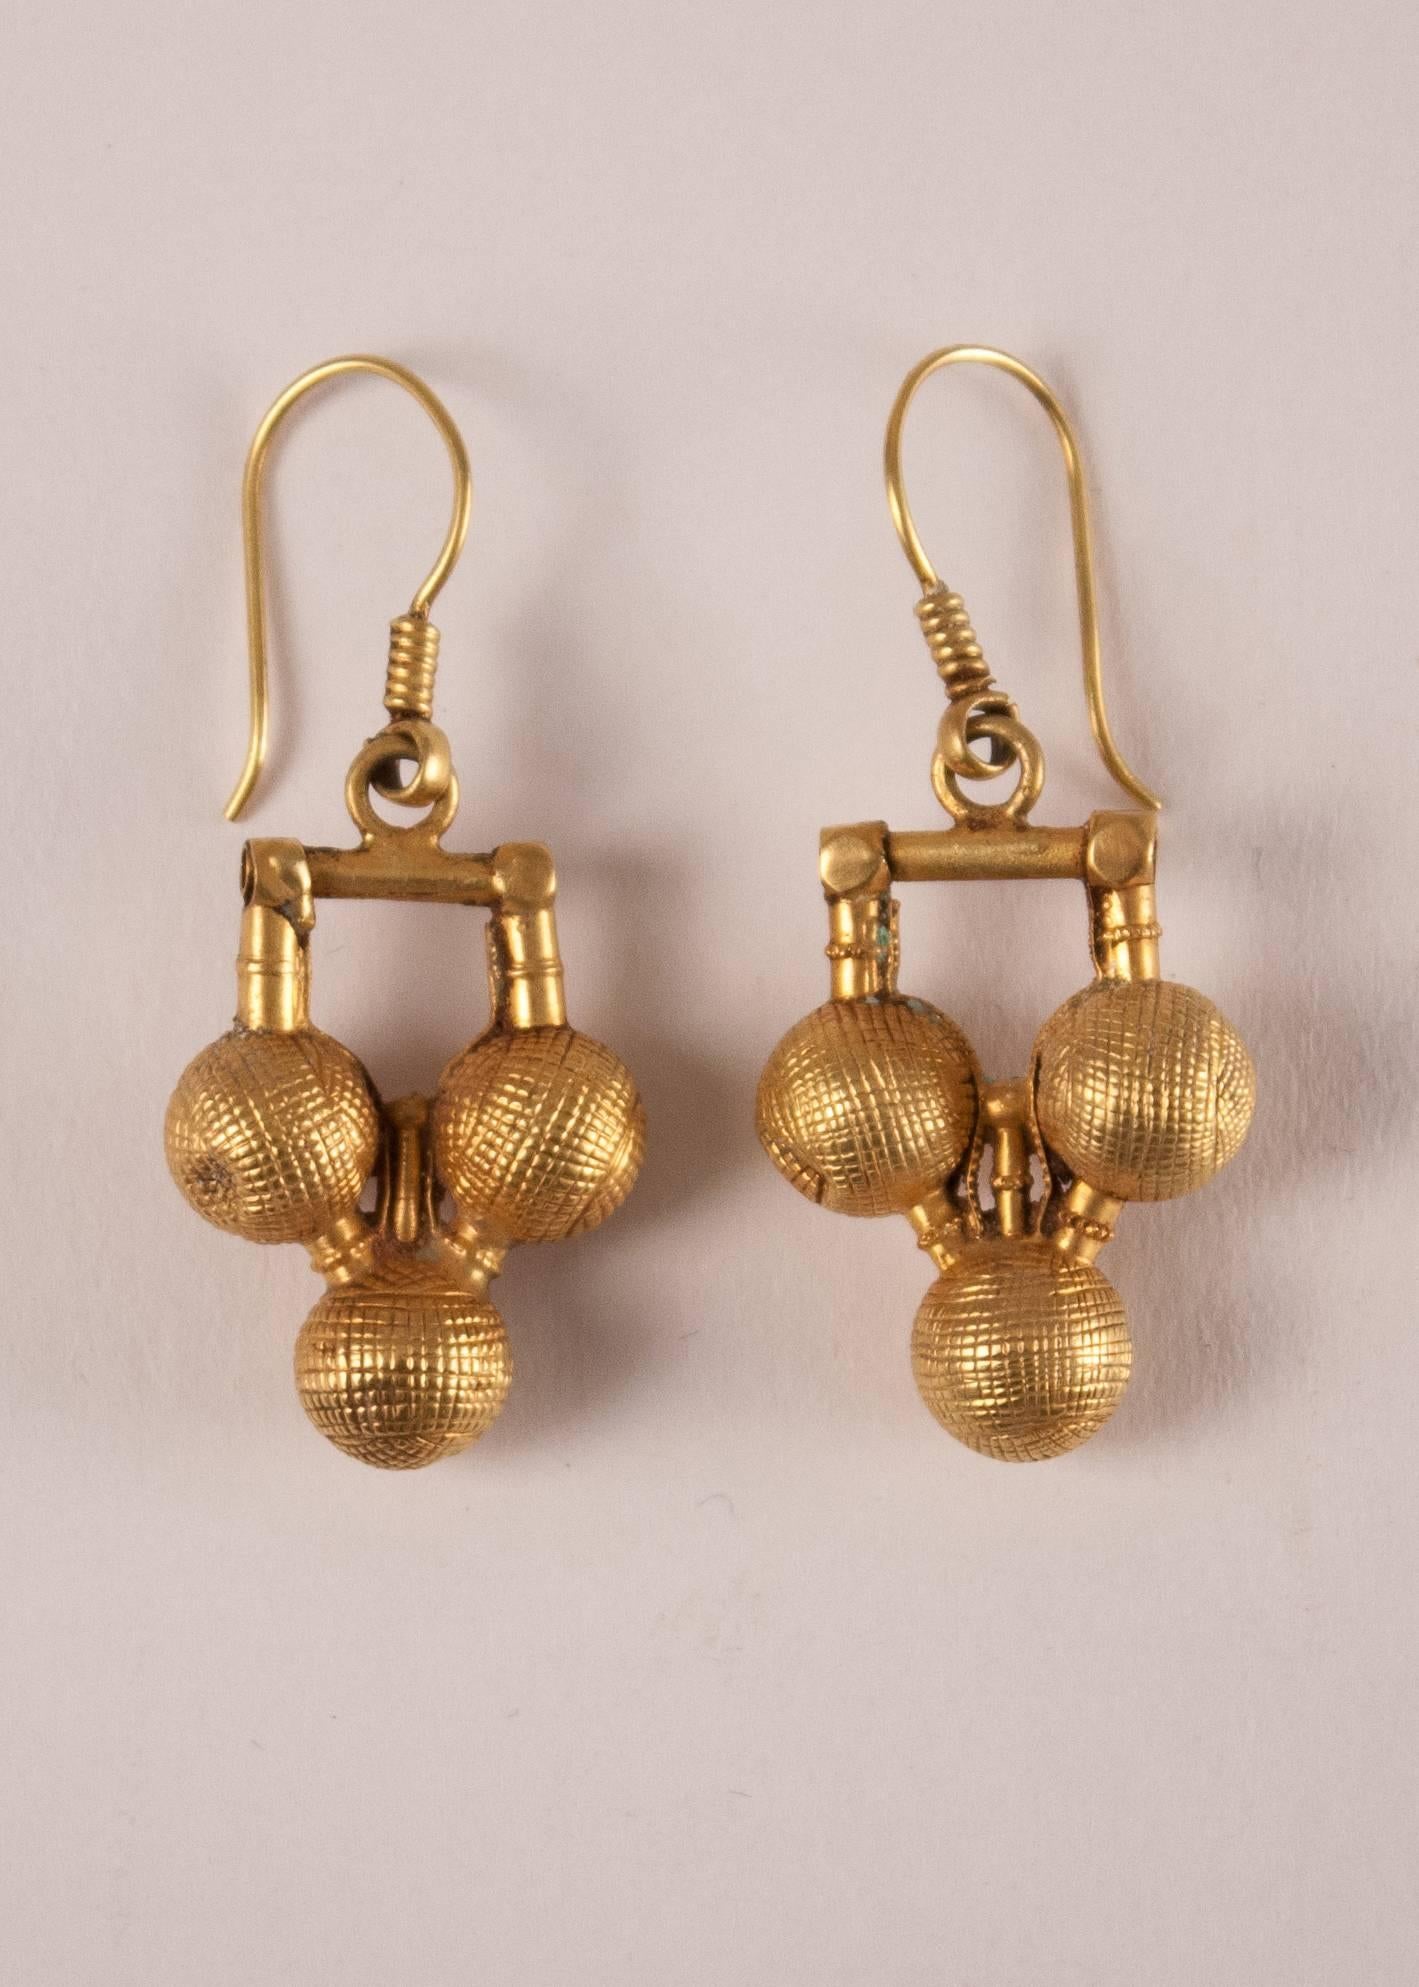 Rare pair of traditional, hand tooled 22-carat gold over wax core "three ball" dangle earrings from Rajasthan, India, circa 1940. At 3.2 grams each, the set is lightweight and easy to wear. Some subtle surface wear attests to the age and